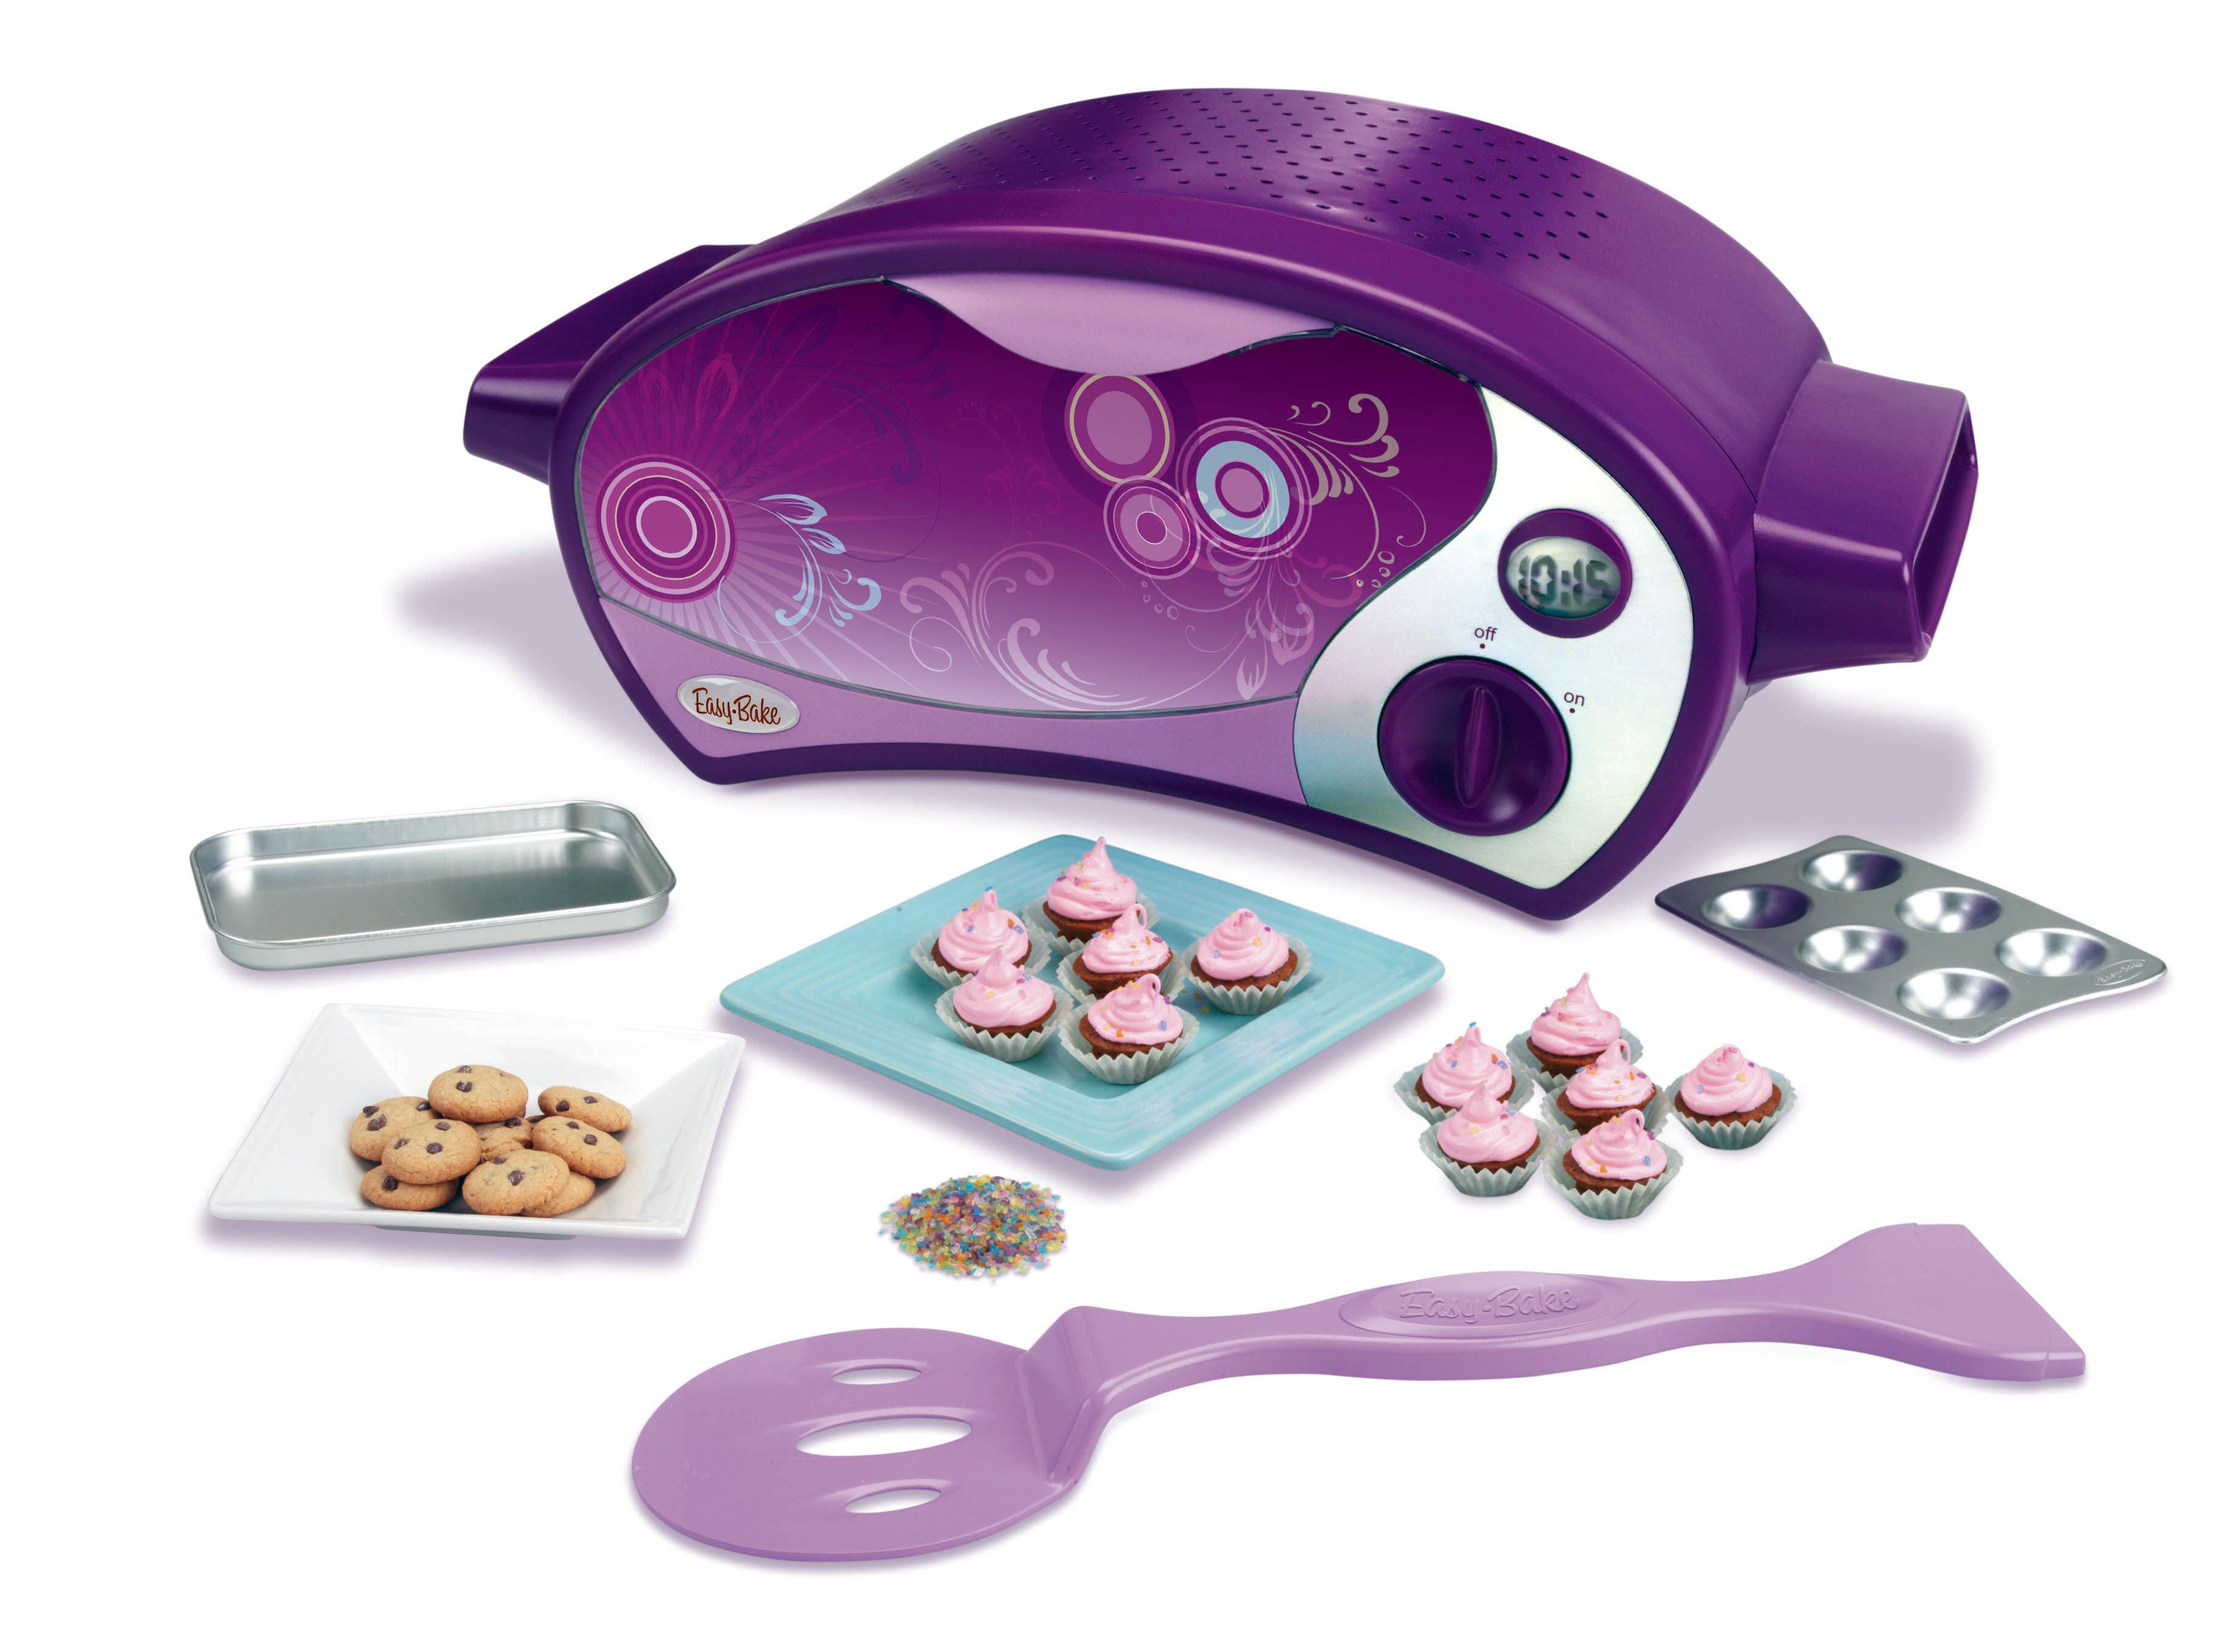 Easy-Bake Oven - The Strong National Museum of Play